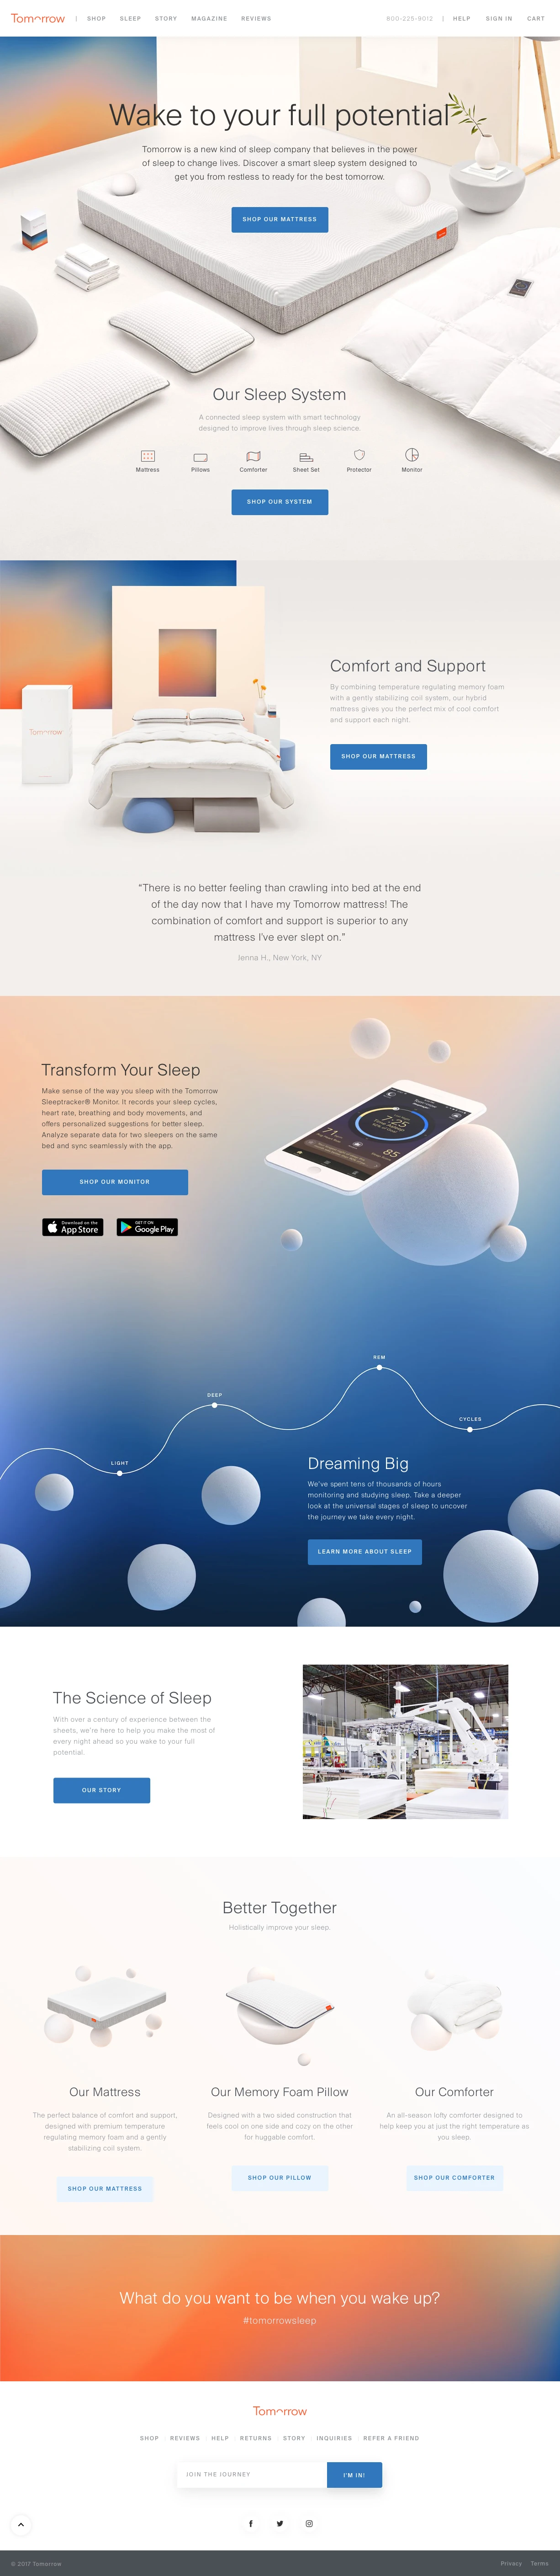 Tomorrow Sleep Landing Page Example: Tomorrow is a new kind of sleep company that believes in the power of sleep to change lives. Discover a smart sleep system designed to get you from restless to ready for the best tomorrow.